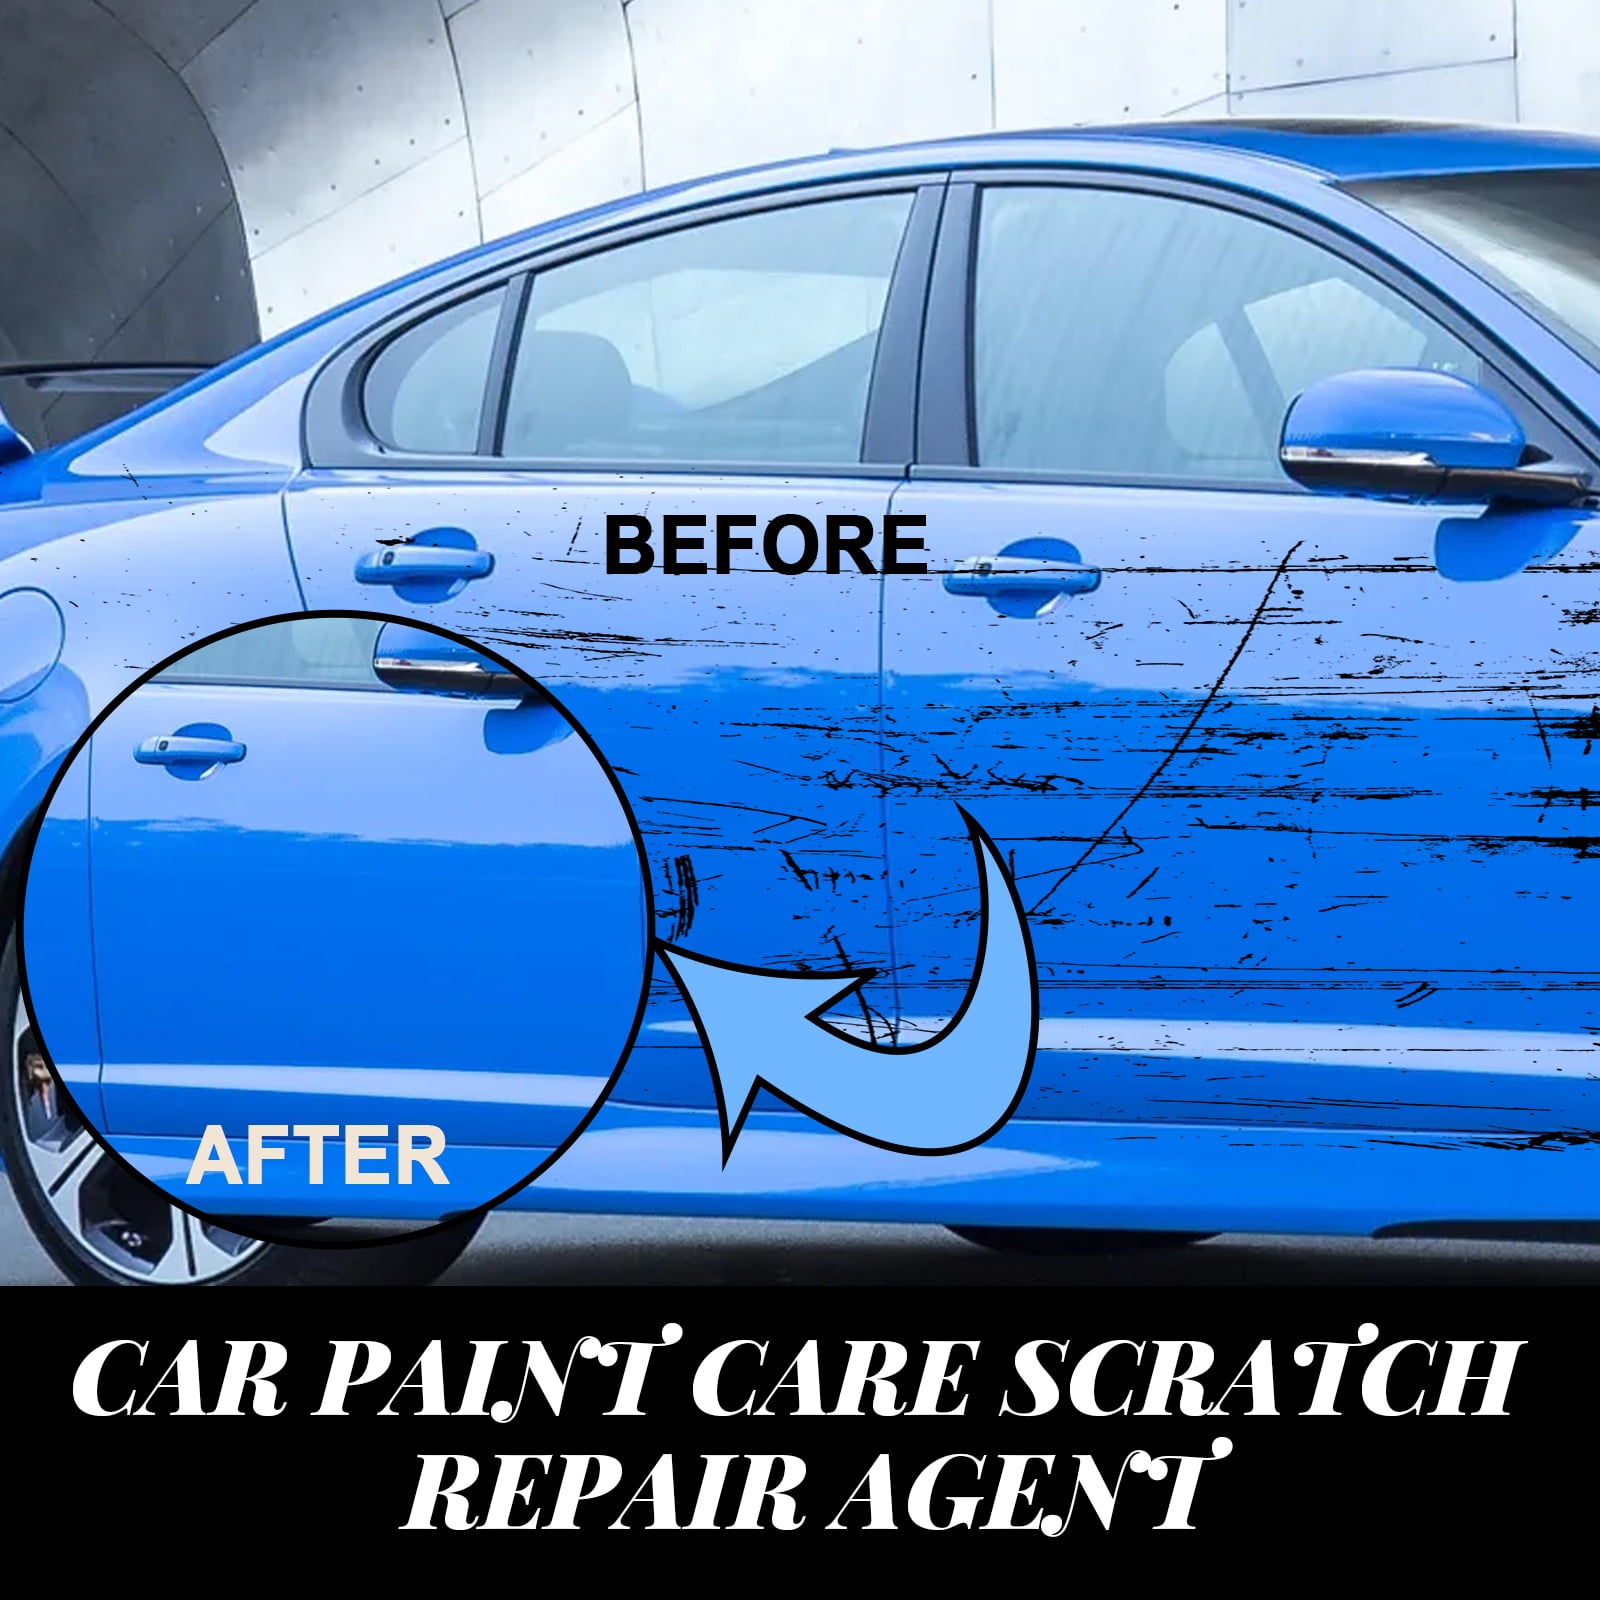 UIRPK Ultimate Paint Restorer,Car Paint to Scratch Artifact,f1 CC Scratch  Remover,Ultimate Paint Restorer,Easily Fix Any Scratches, Swirls, or Other